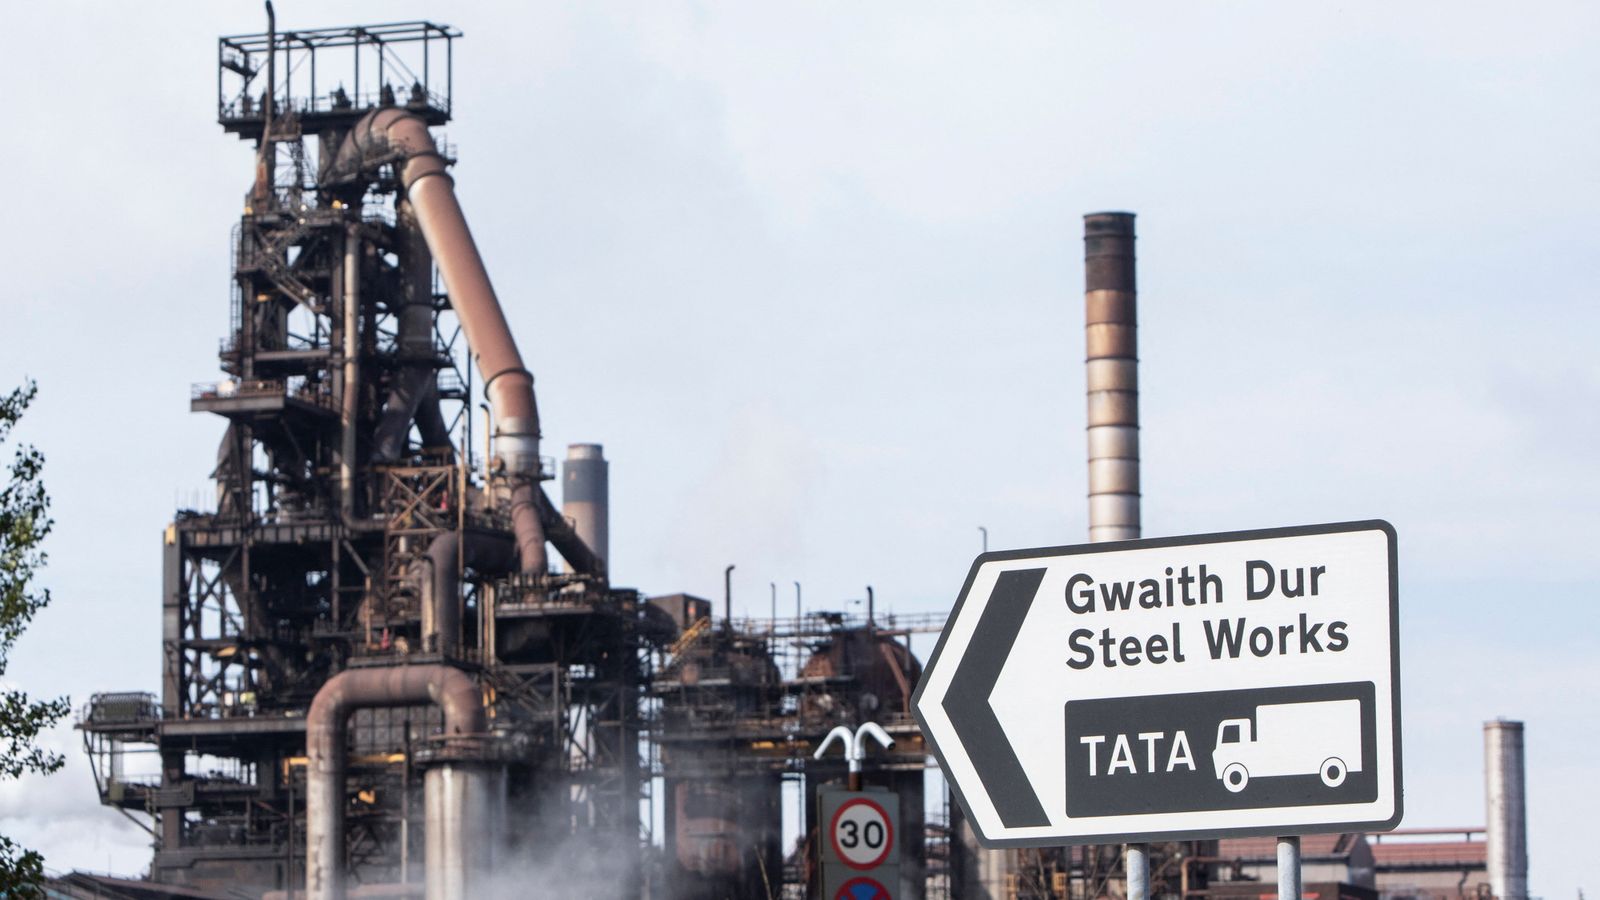 Tata Steel: Thousands of jobs axed at Port Talbot under taxpayer-funded green shift